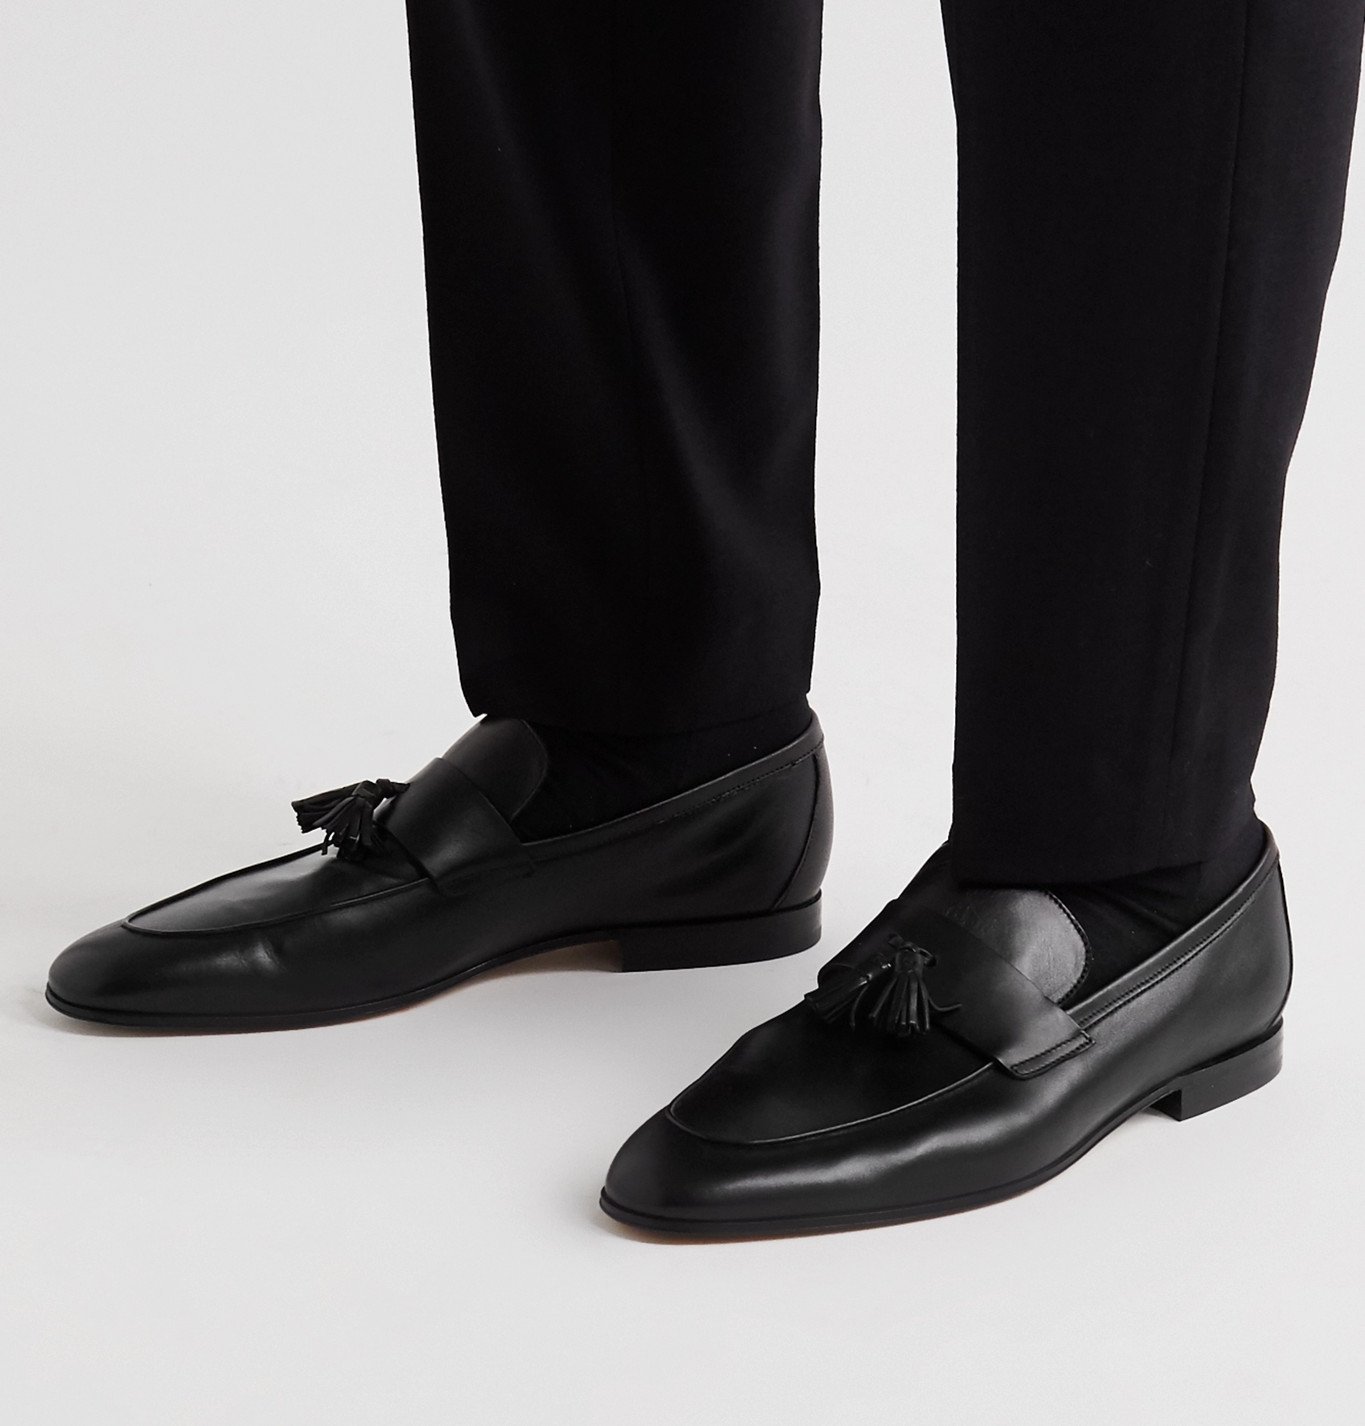 Paul Smith - Hilton Leather Tasselled Loafers - Black Smith